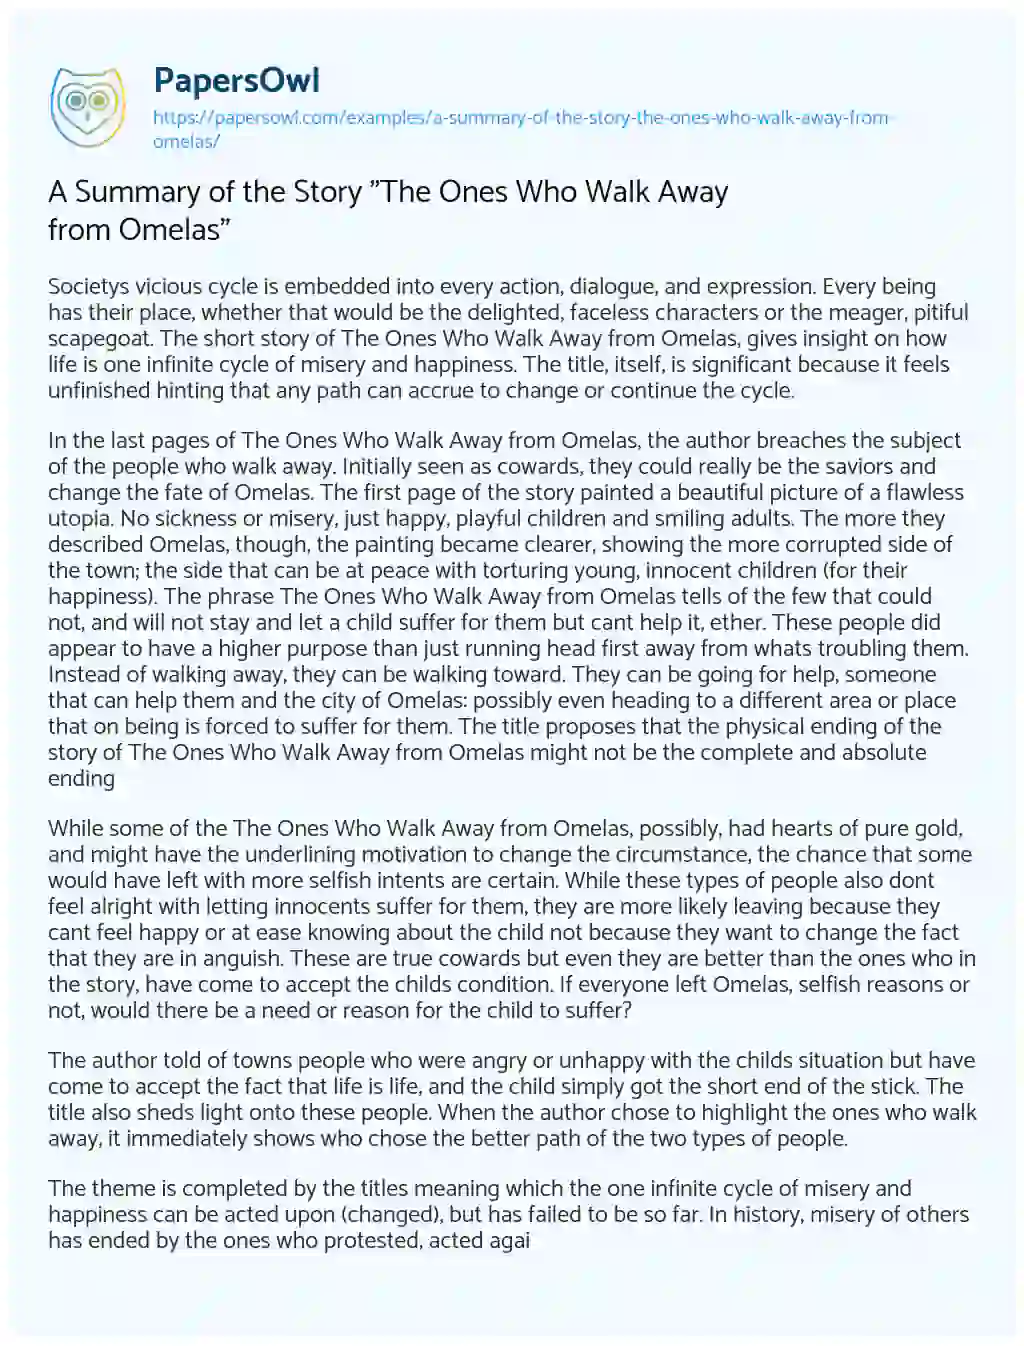 Essay on A Summary of the Story “The Ones who Walk Away from Omelas”